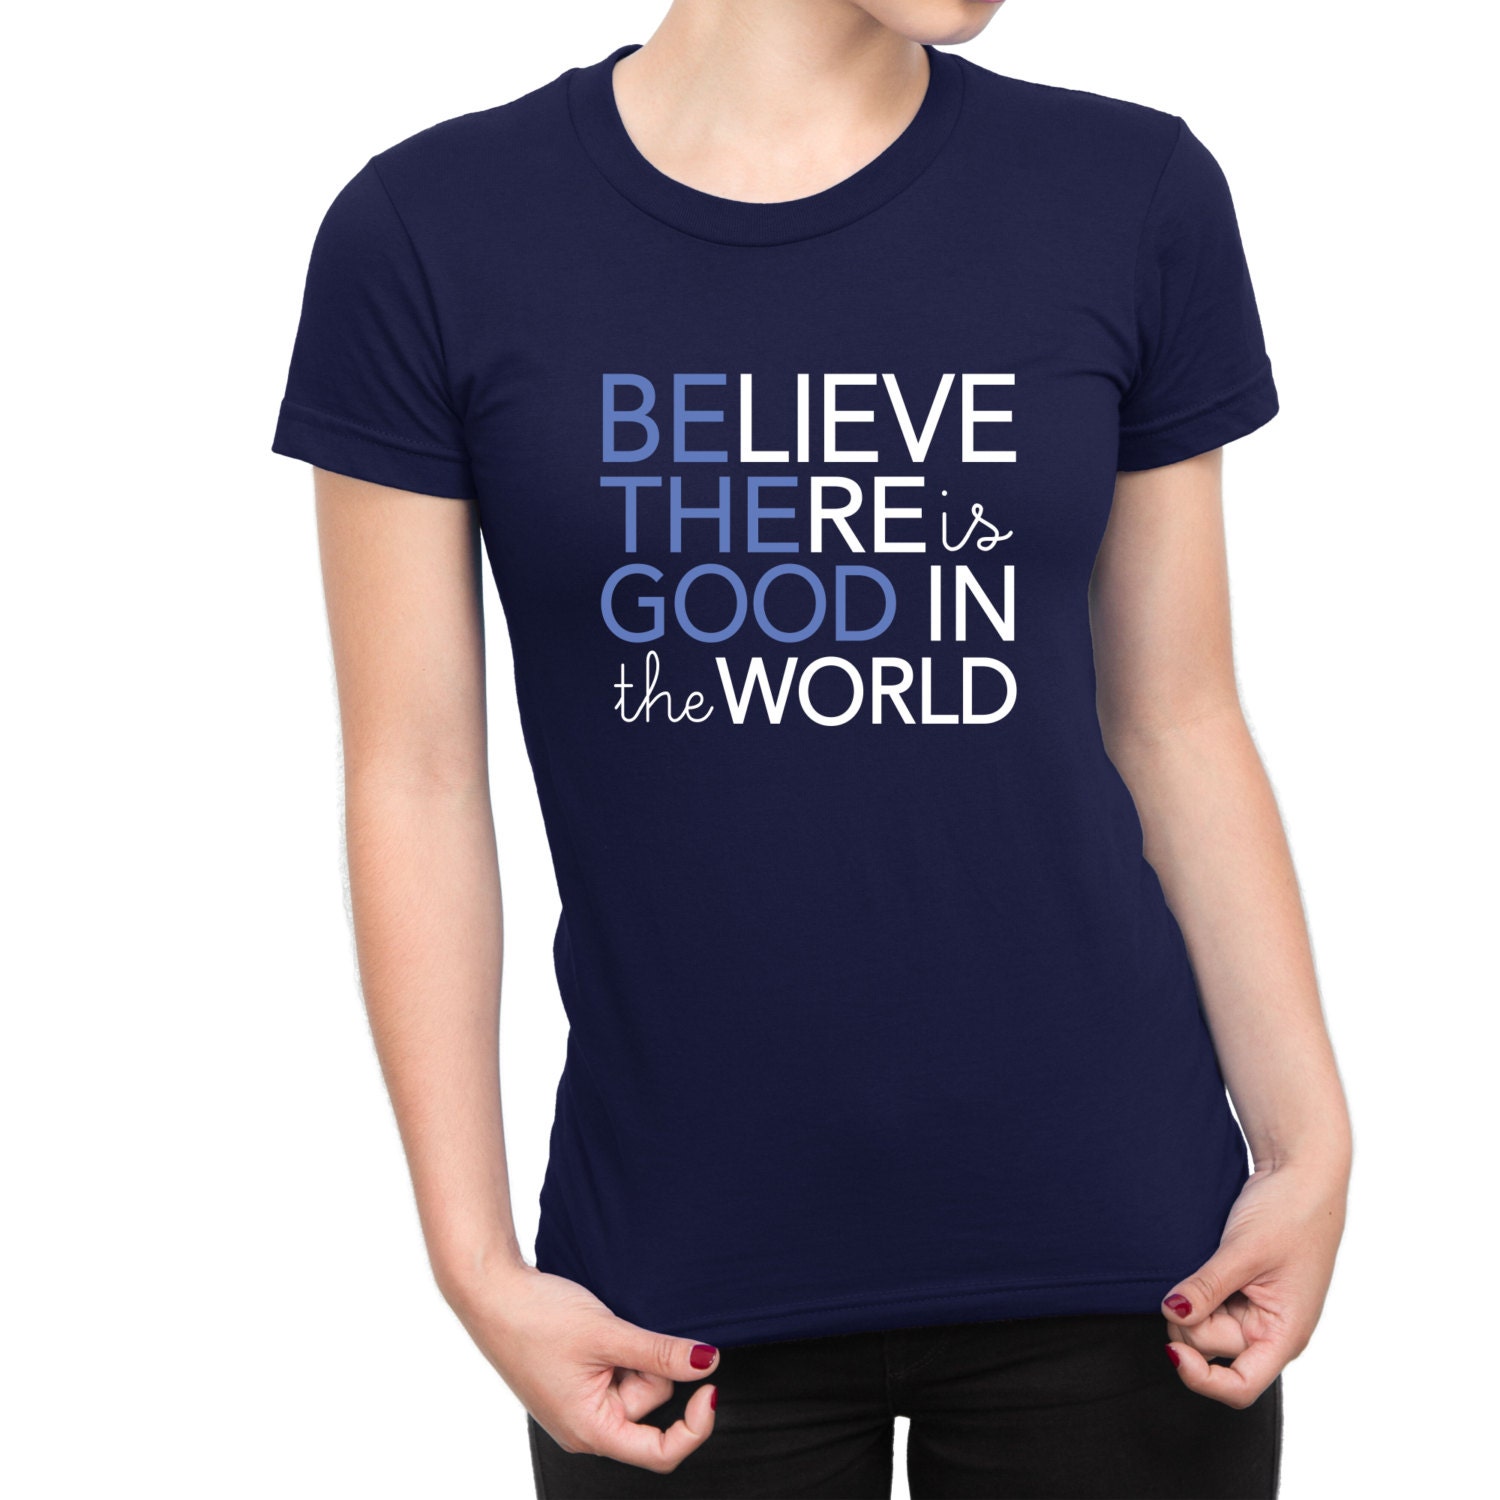 Be the Good in the World Graphic Tee Believe there is Good in